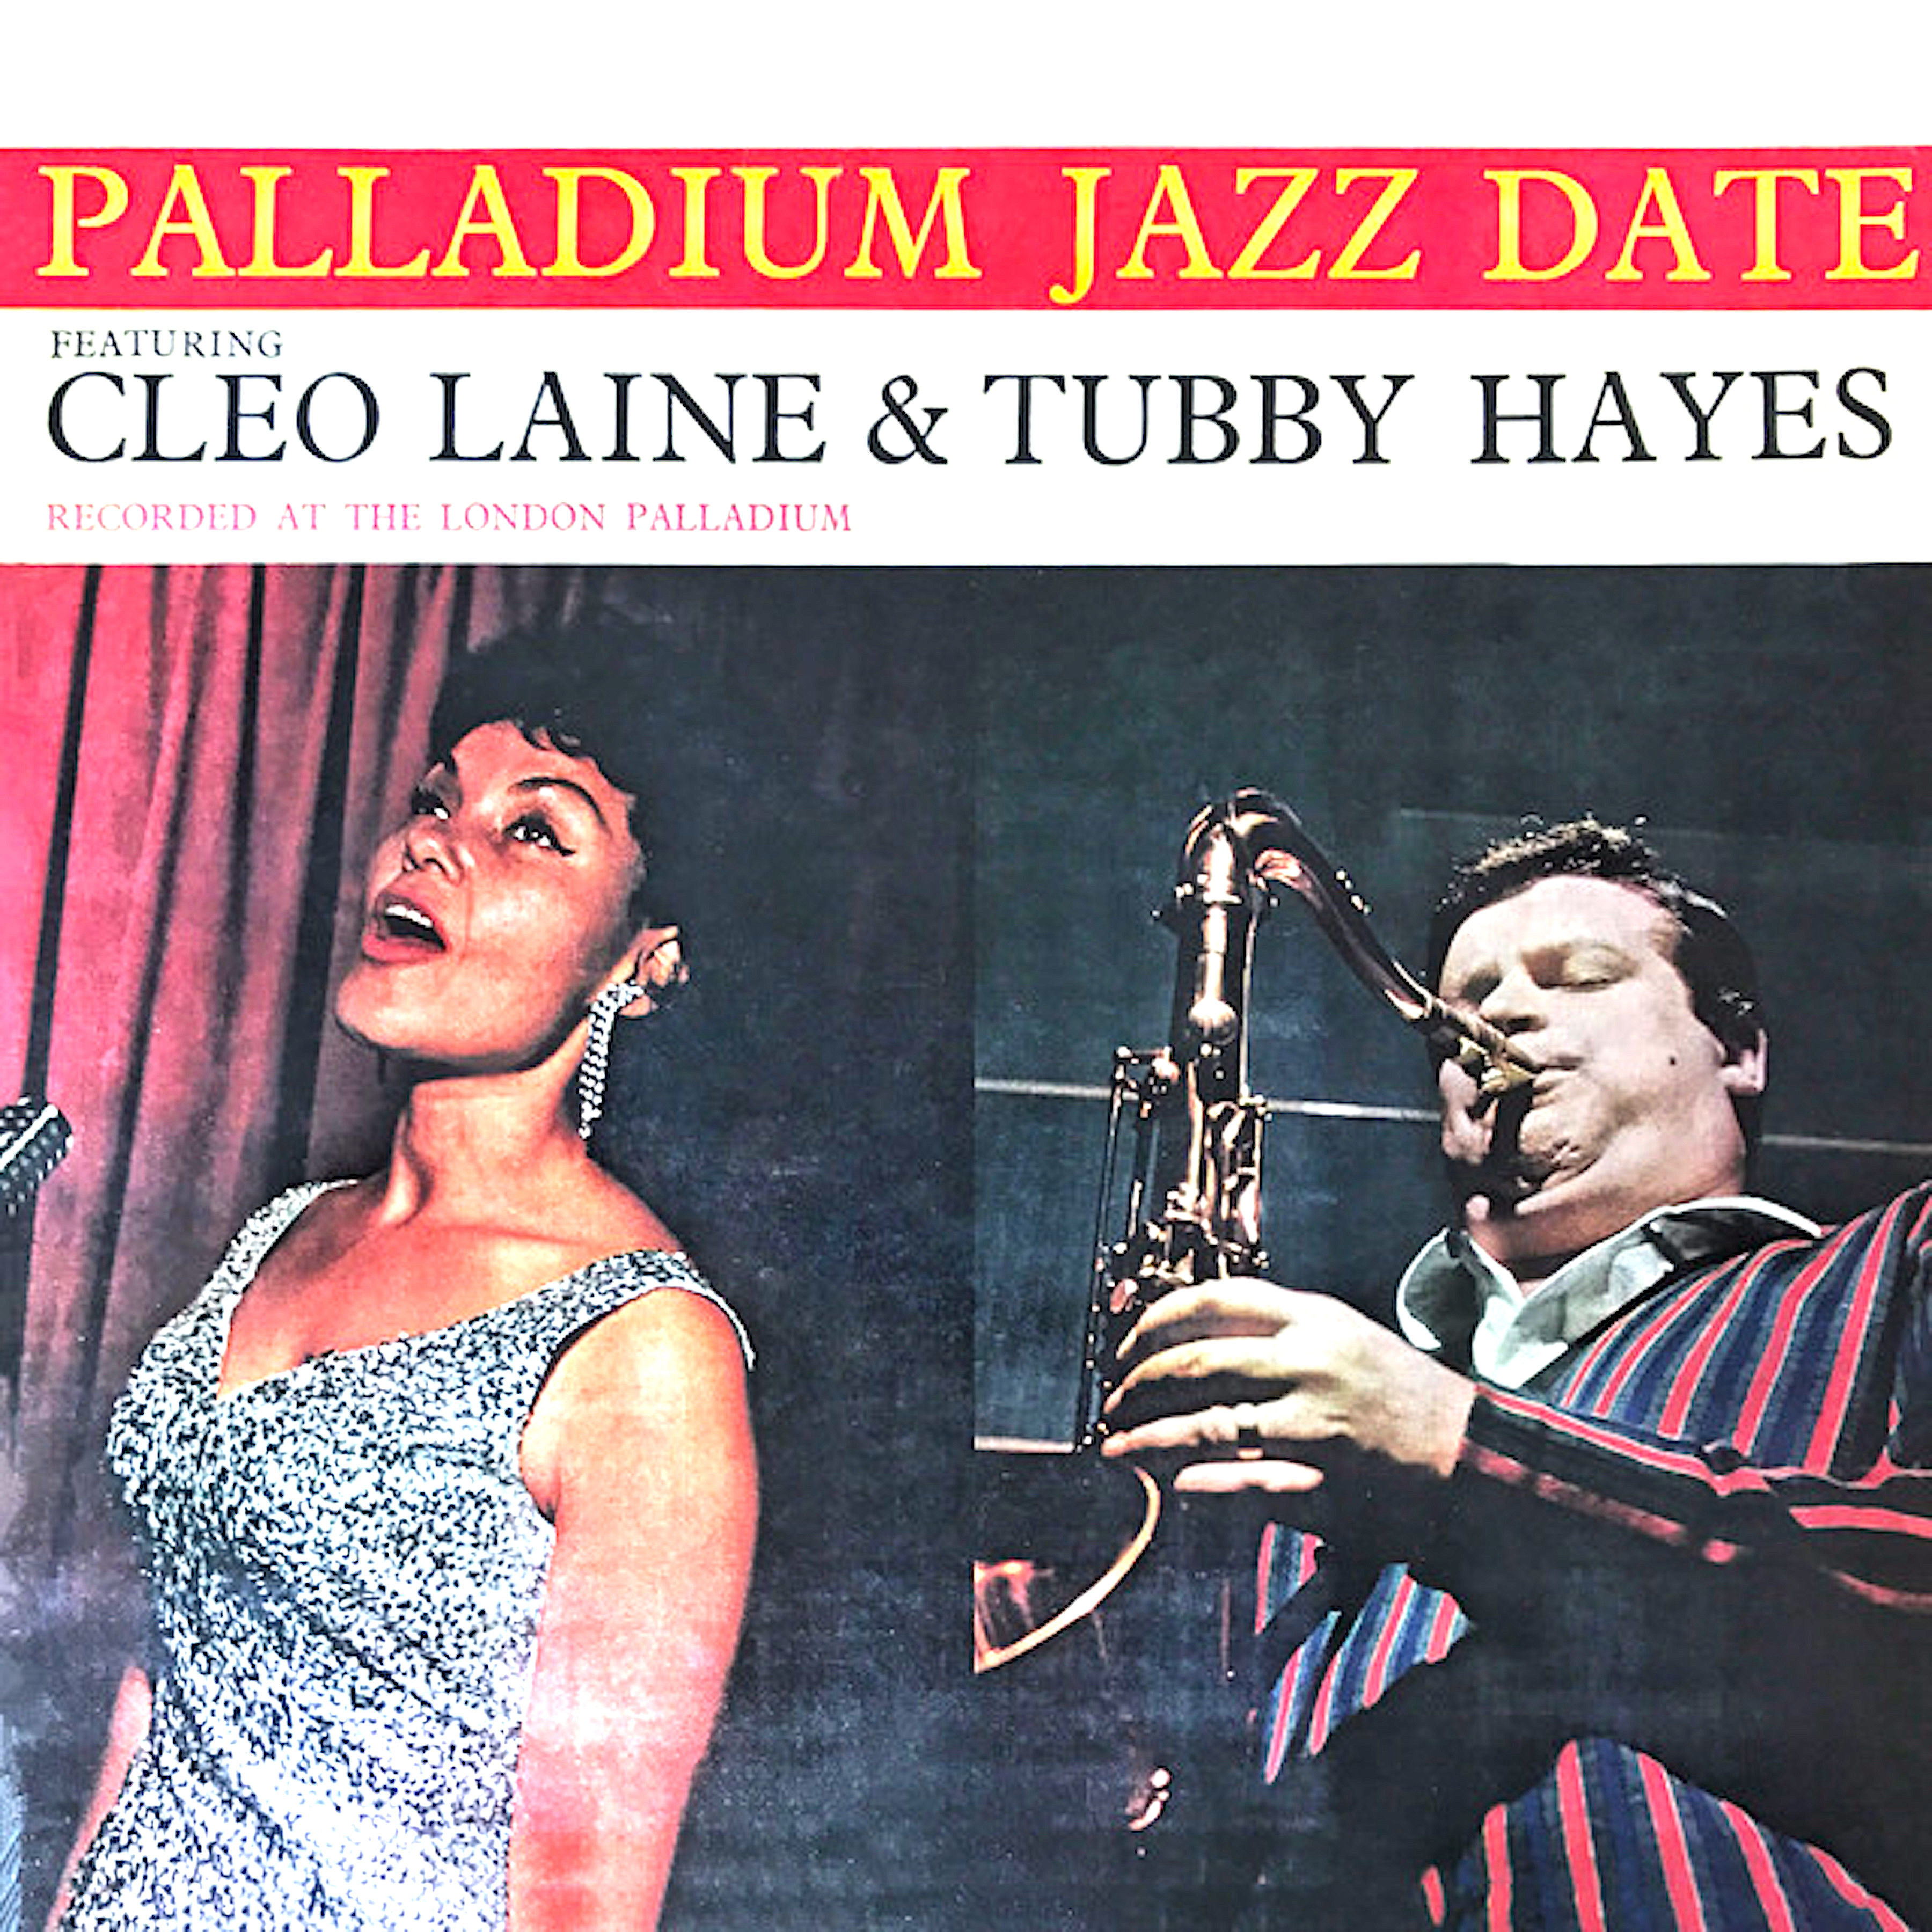 Cleo Laine and Tubby Hayes – Palladium Jazz Date (1961/2022) [Official Digital Download 24bit/96kHz]